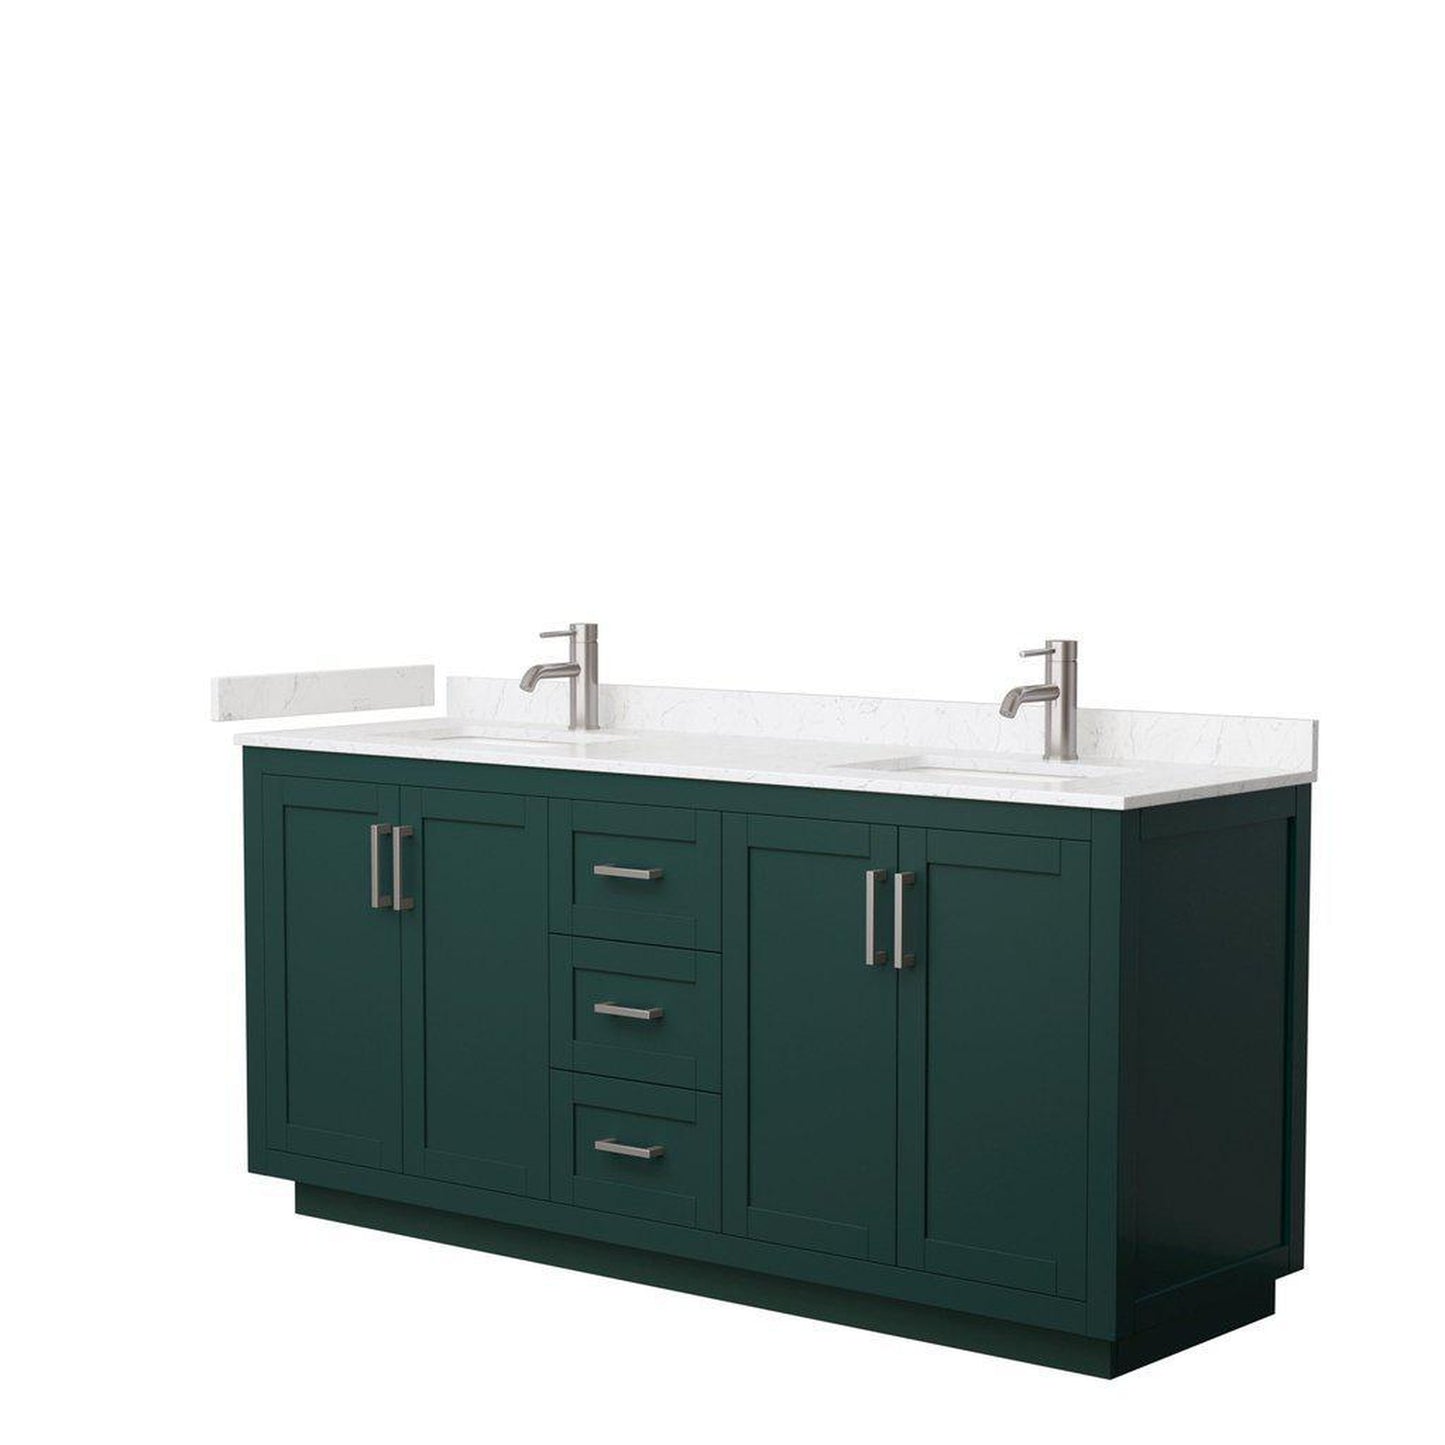 Wyndham Collection Miranda 72" Double Bathroom Green Vanity Set With Light-Vein Carrara Cultured Marble Countertop, Undermount Square Sink, And Brushed Nickel Trim